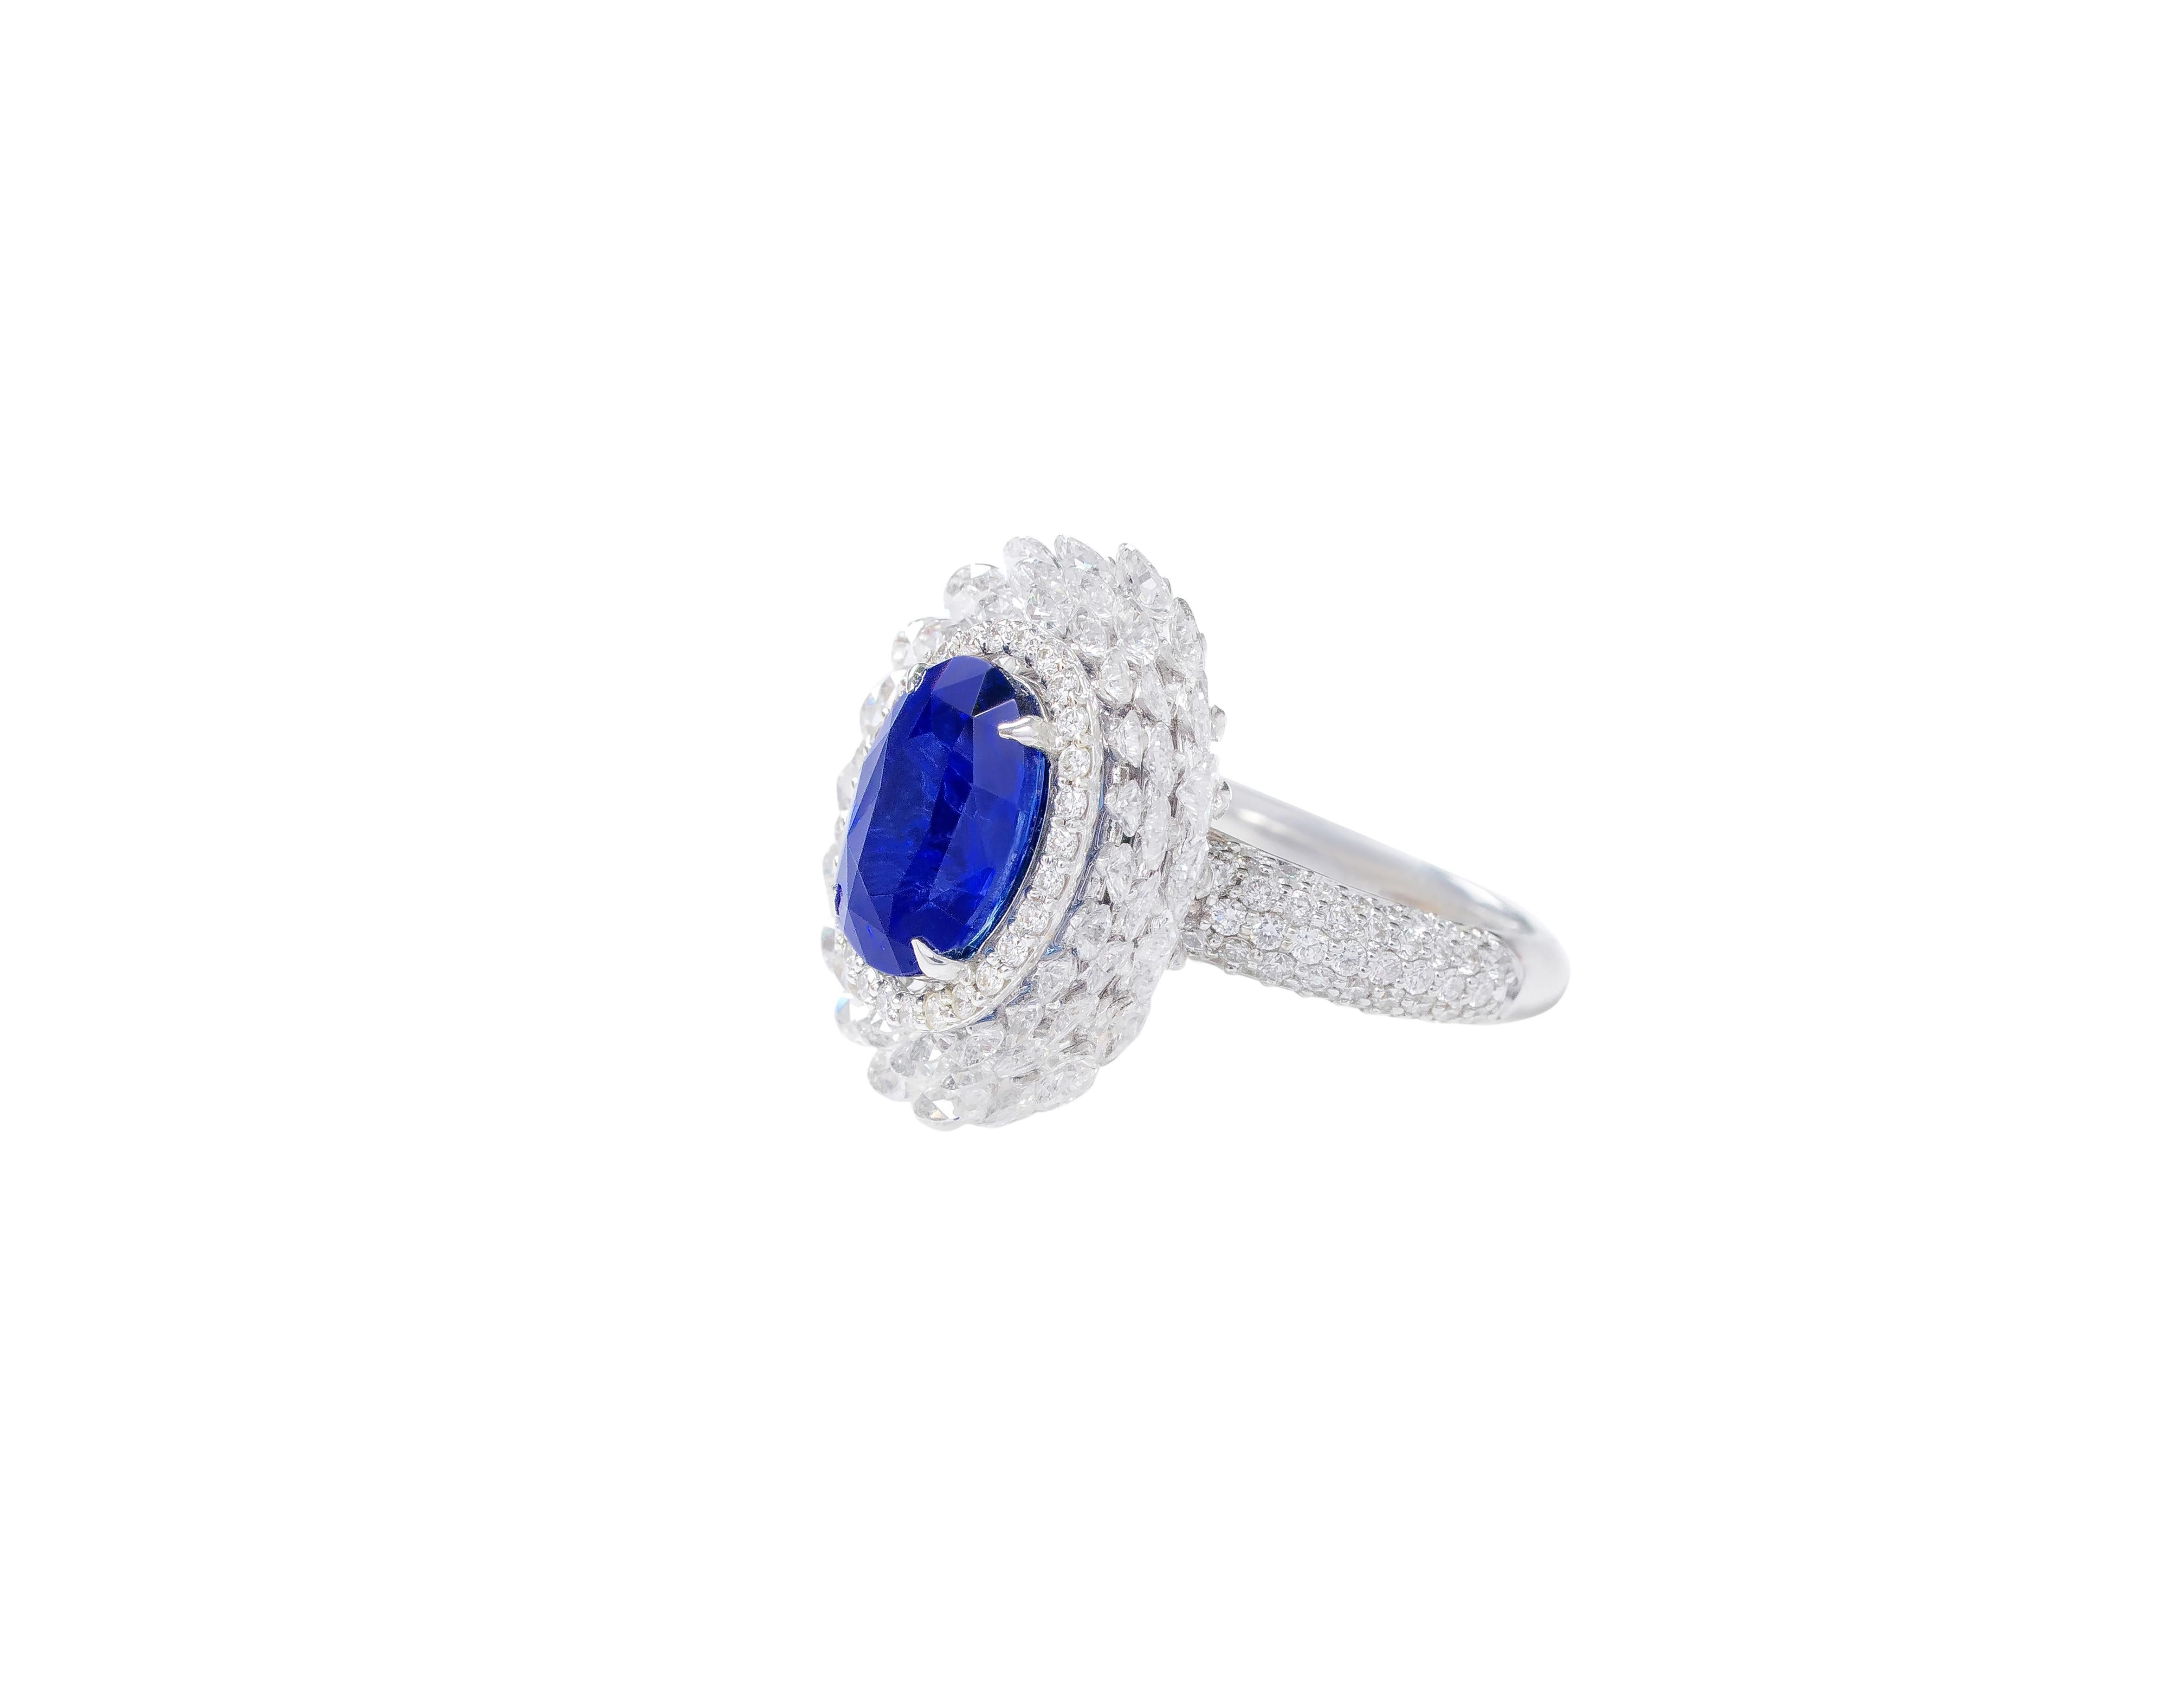 18 Karat White Gold 3.80 Carat Sapphire and Diamond Cocktail Ring

This impeccable cocktail royal blue sapphire and diamond rose-cut ring is a prolific design. The ring sets itself apart with the exquisite oval blue sapphire surrounded first by a